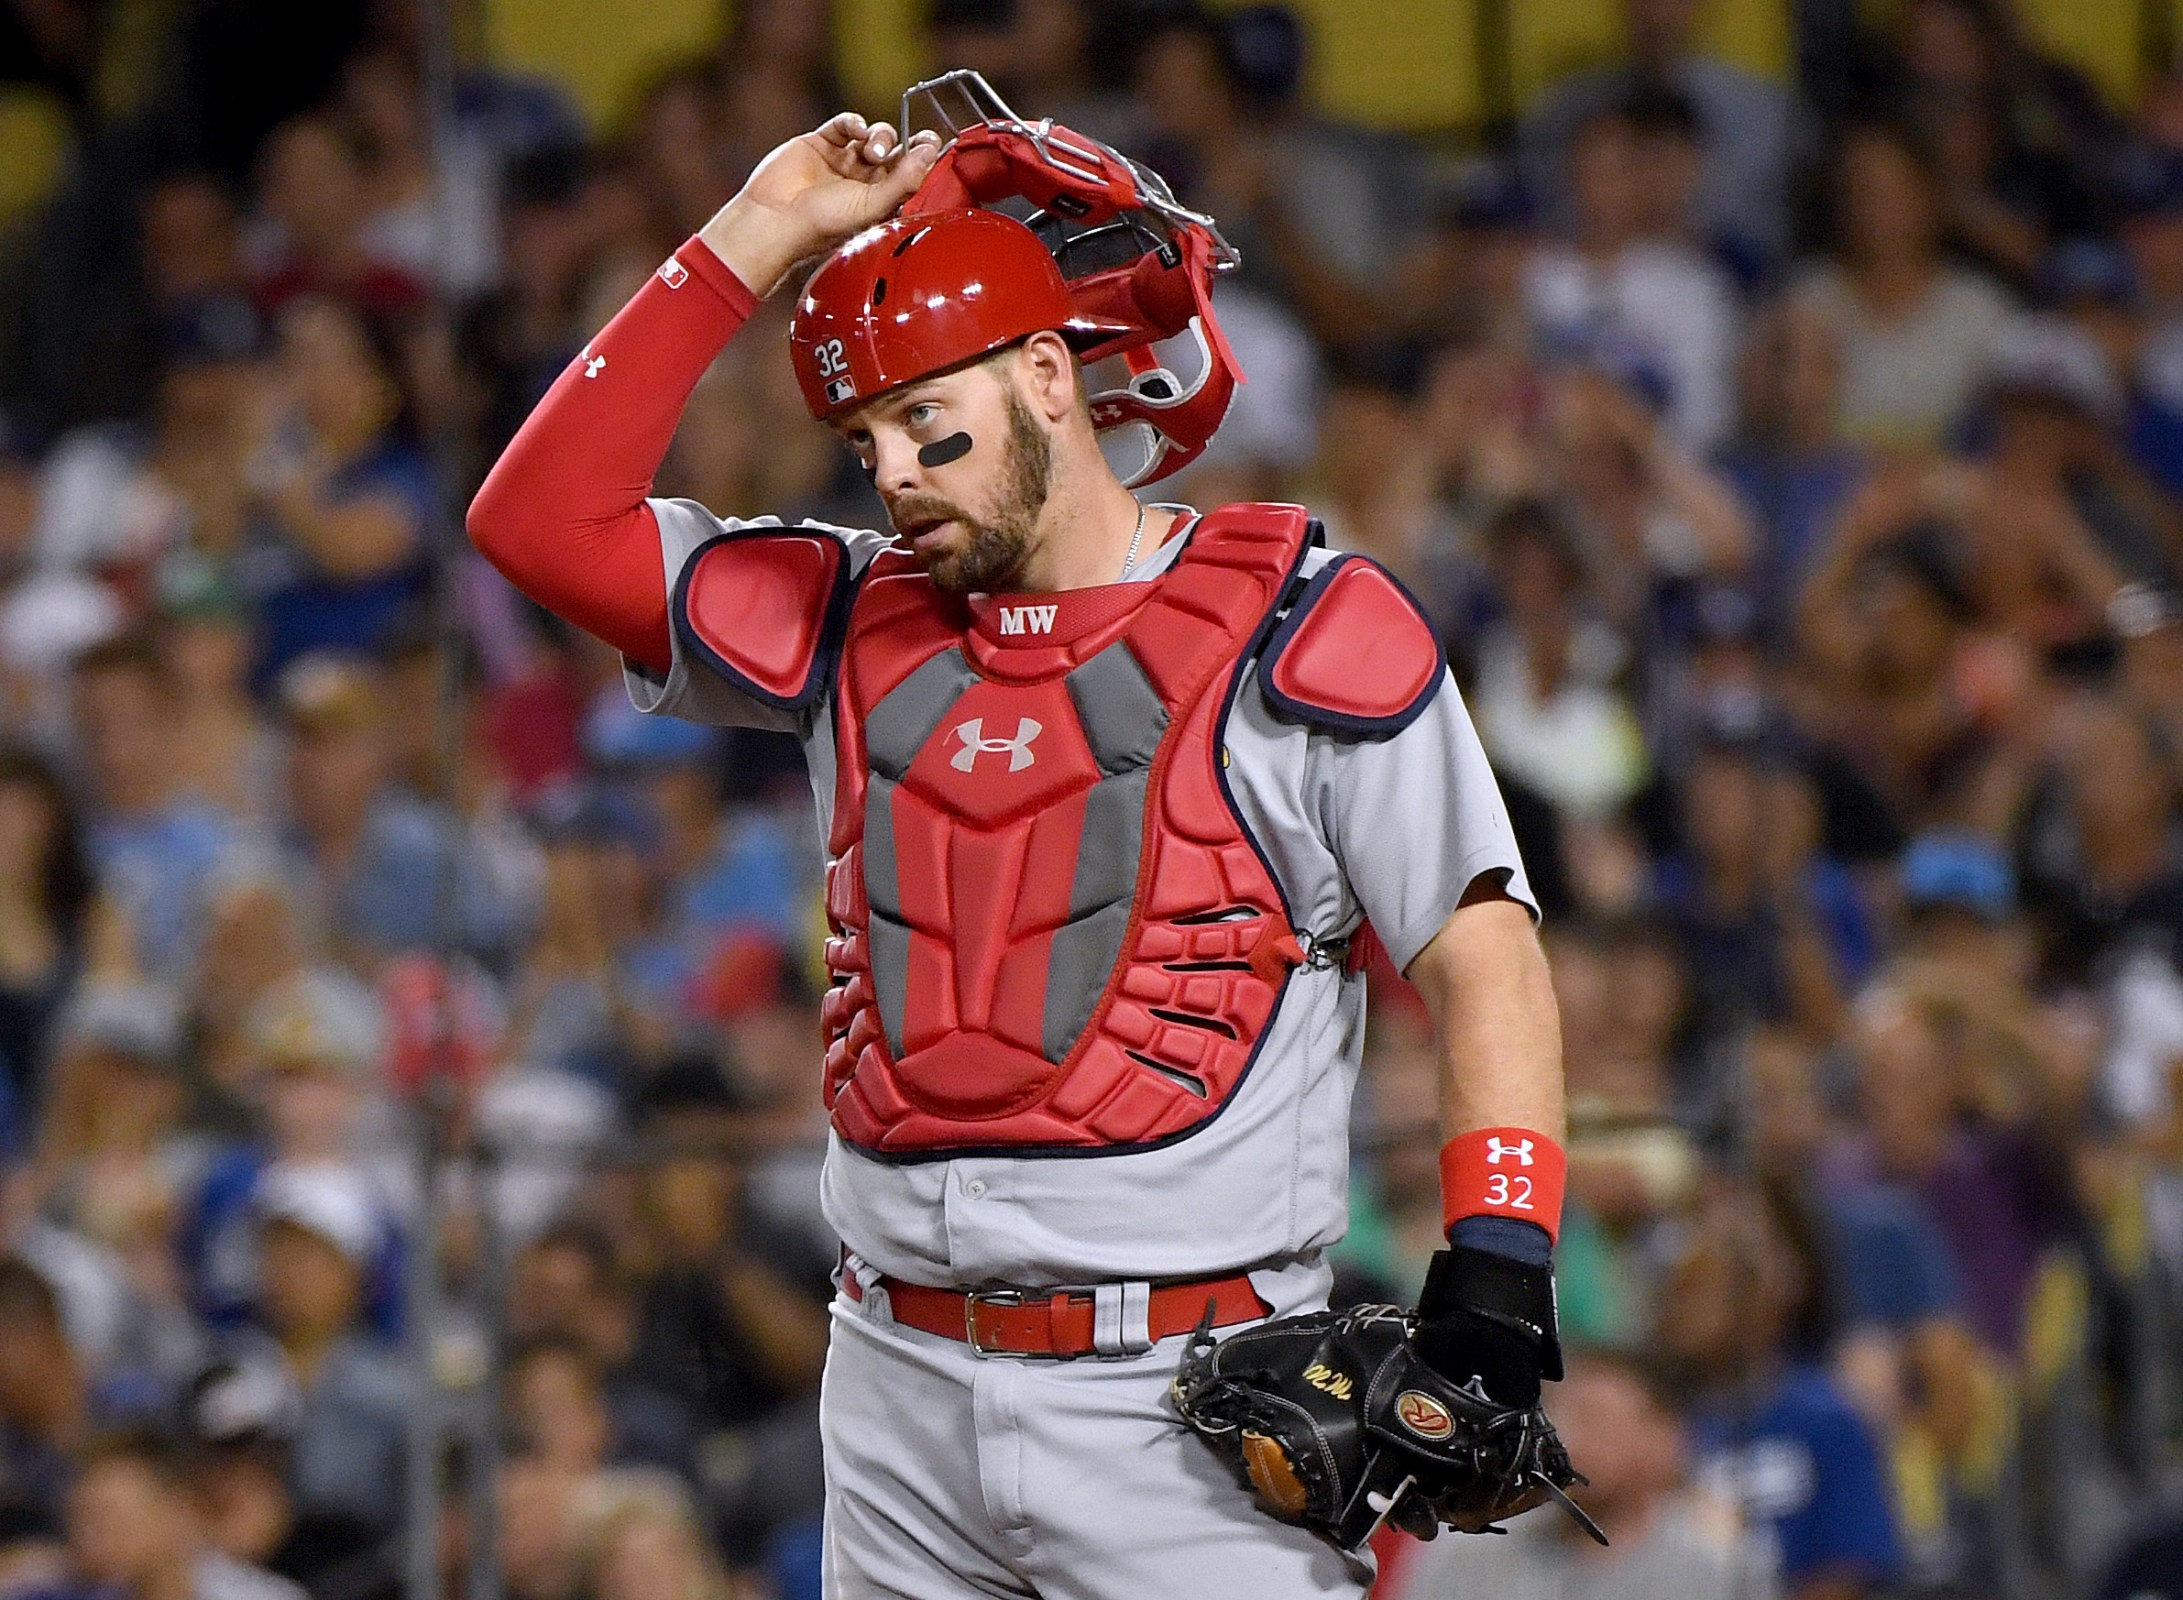 Matt Wieters, seen here catching for the Cardinals in a 2019 game.